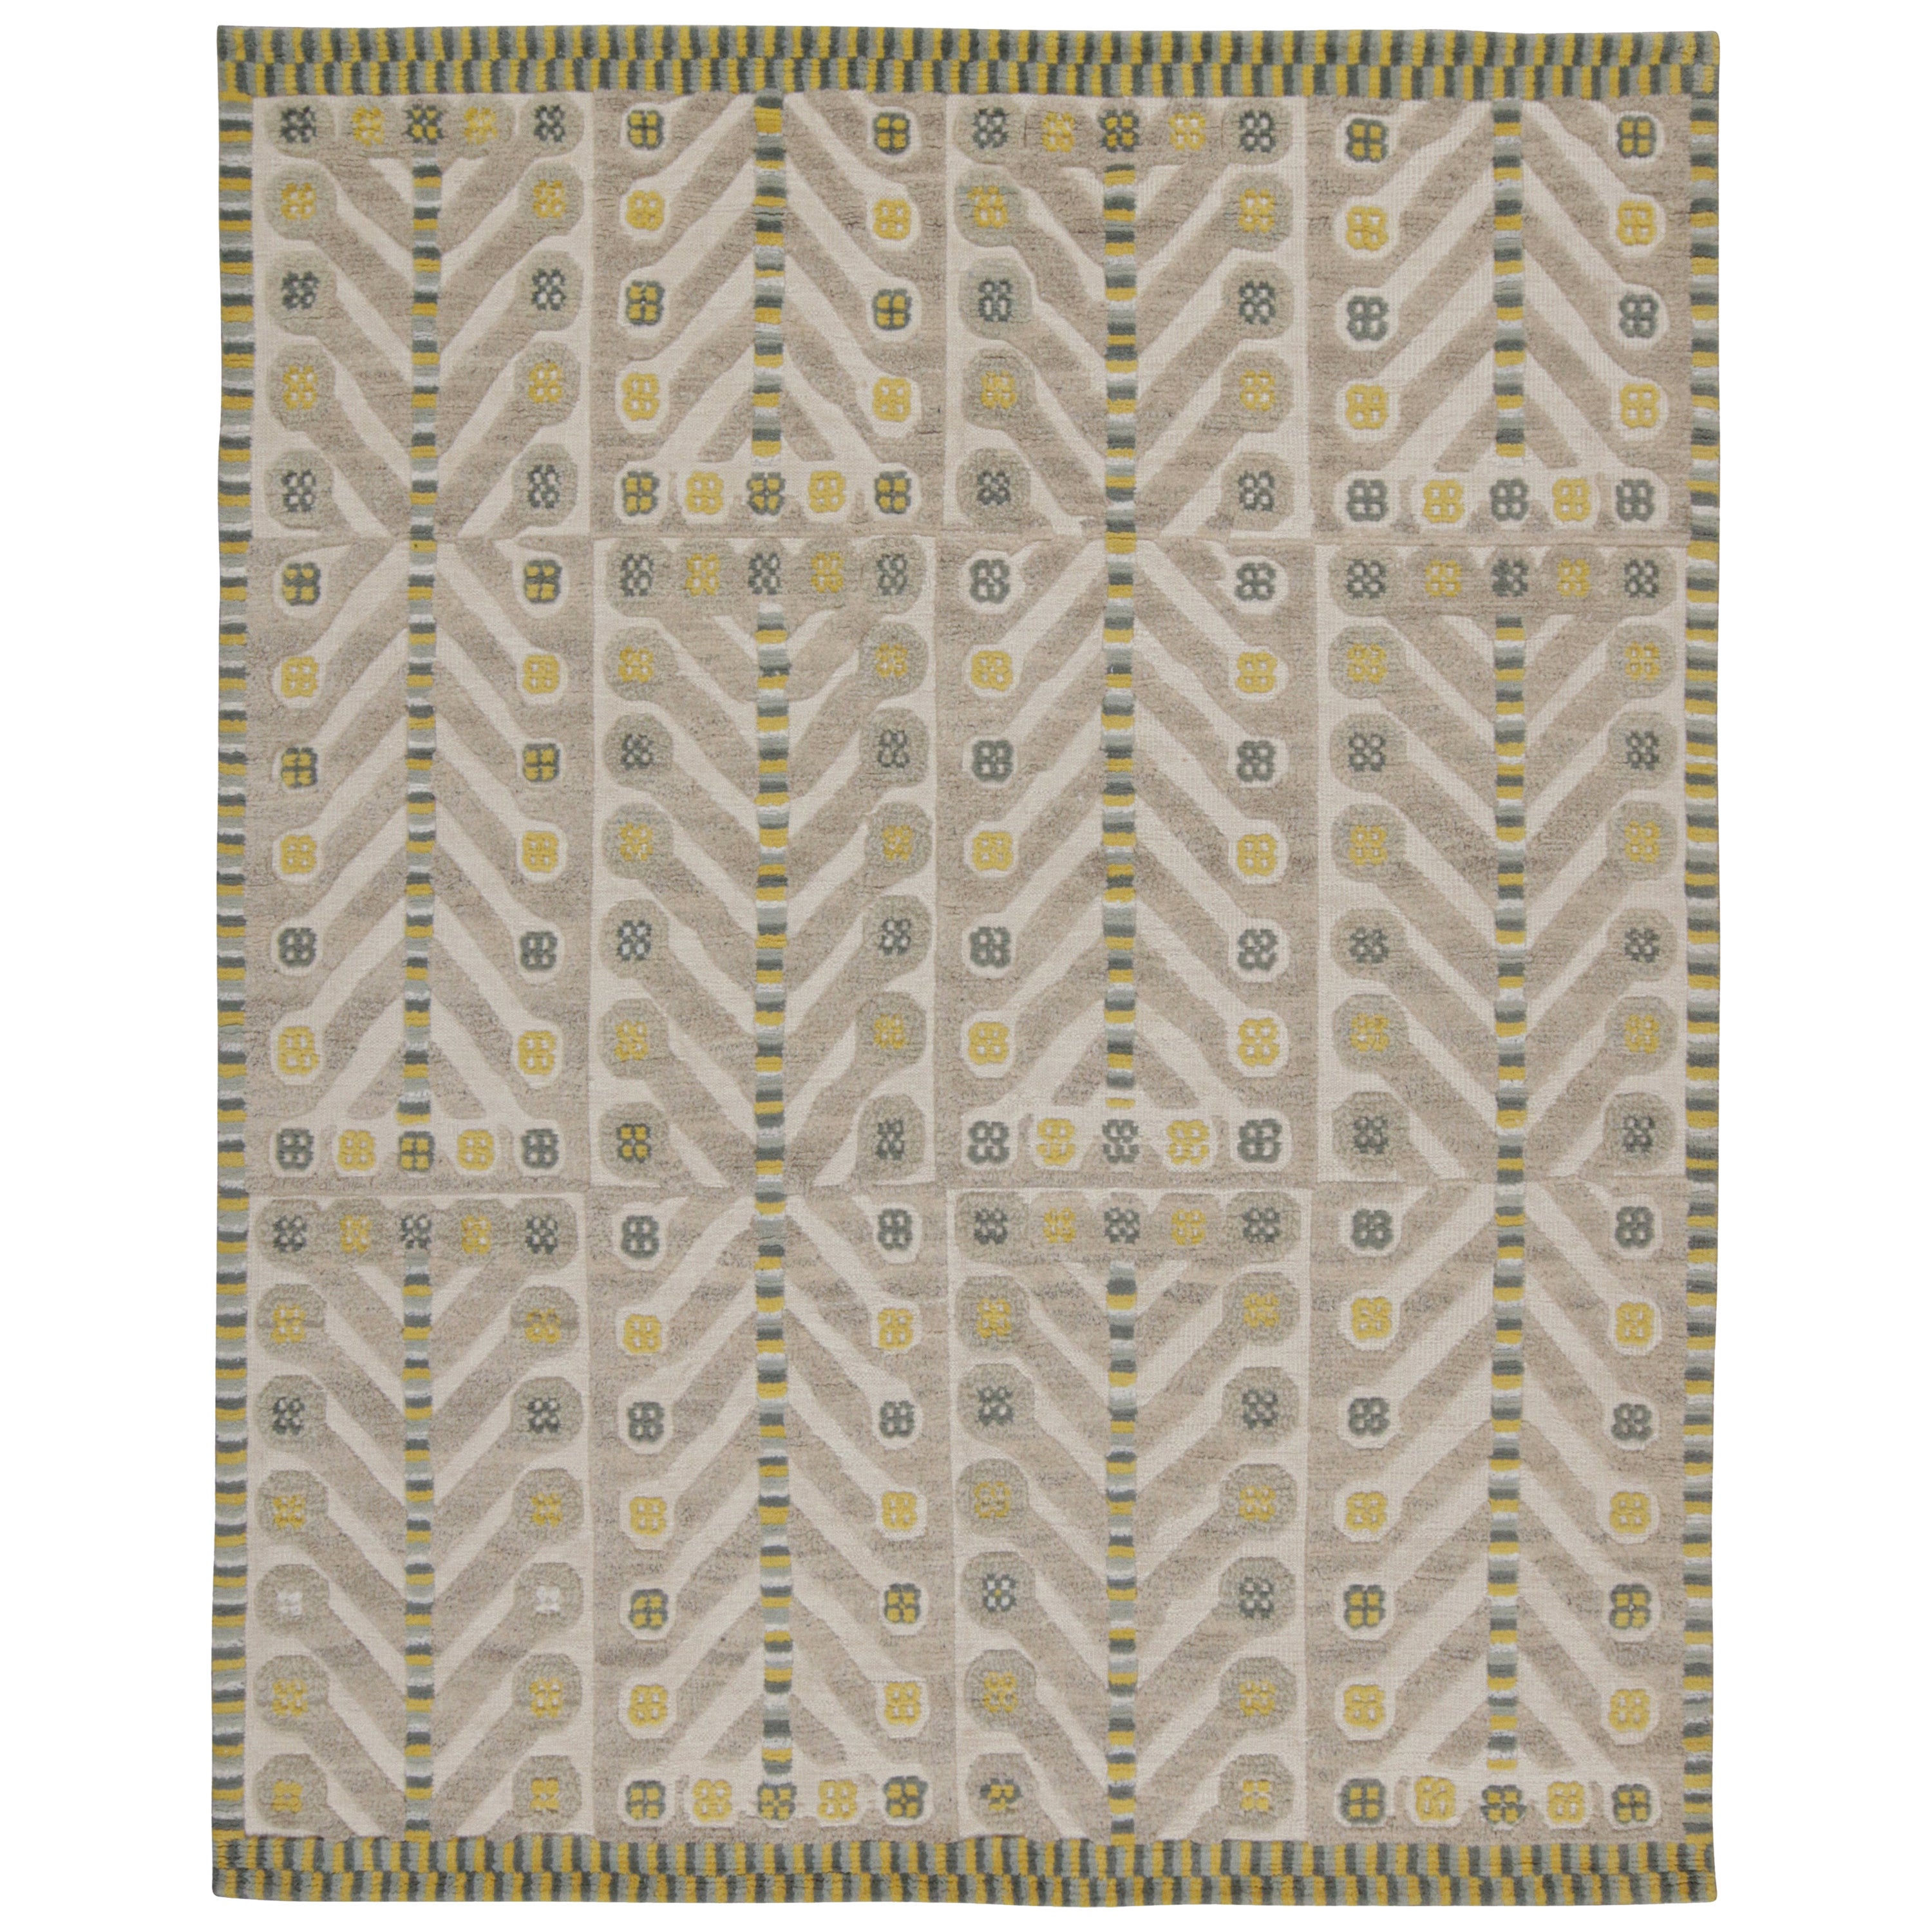 Rug & Kilim’s Scandinavian Style Rug in Brown, gray-Blue & Gold Patterns